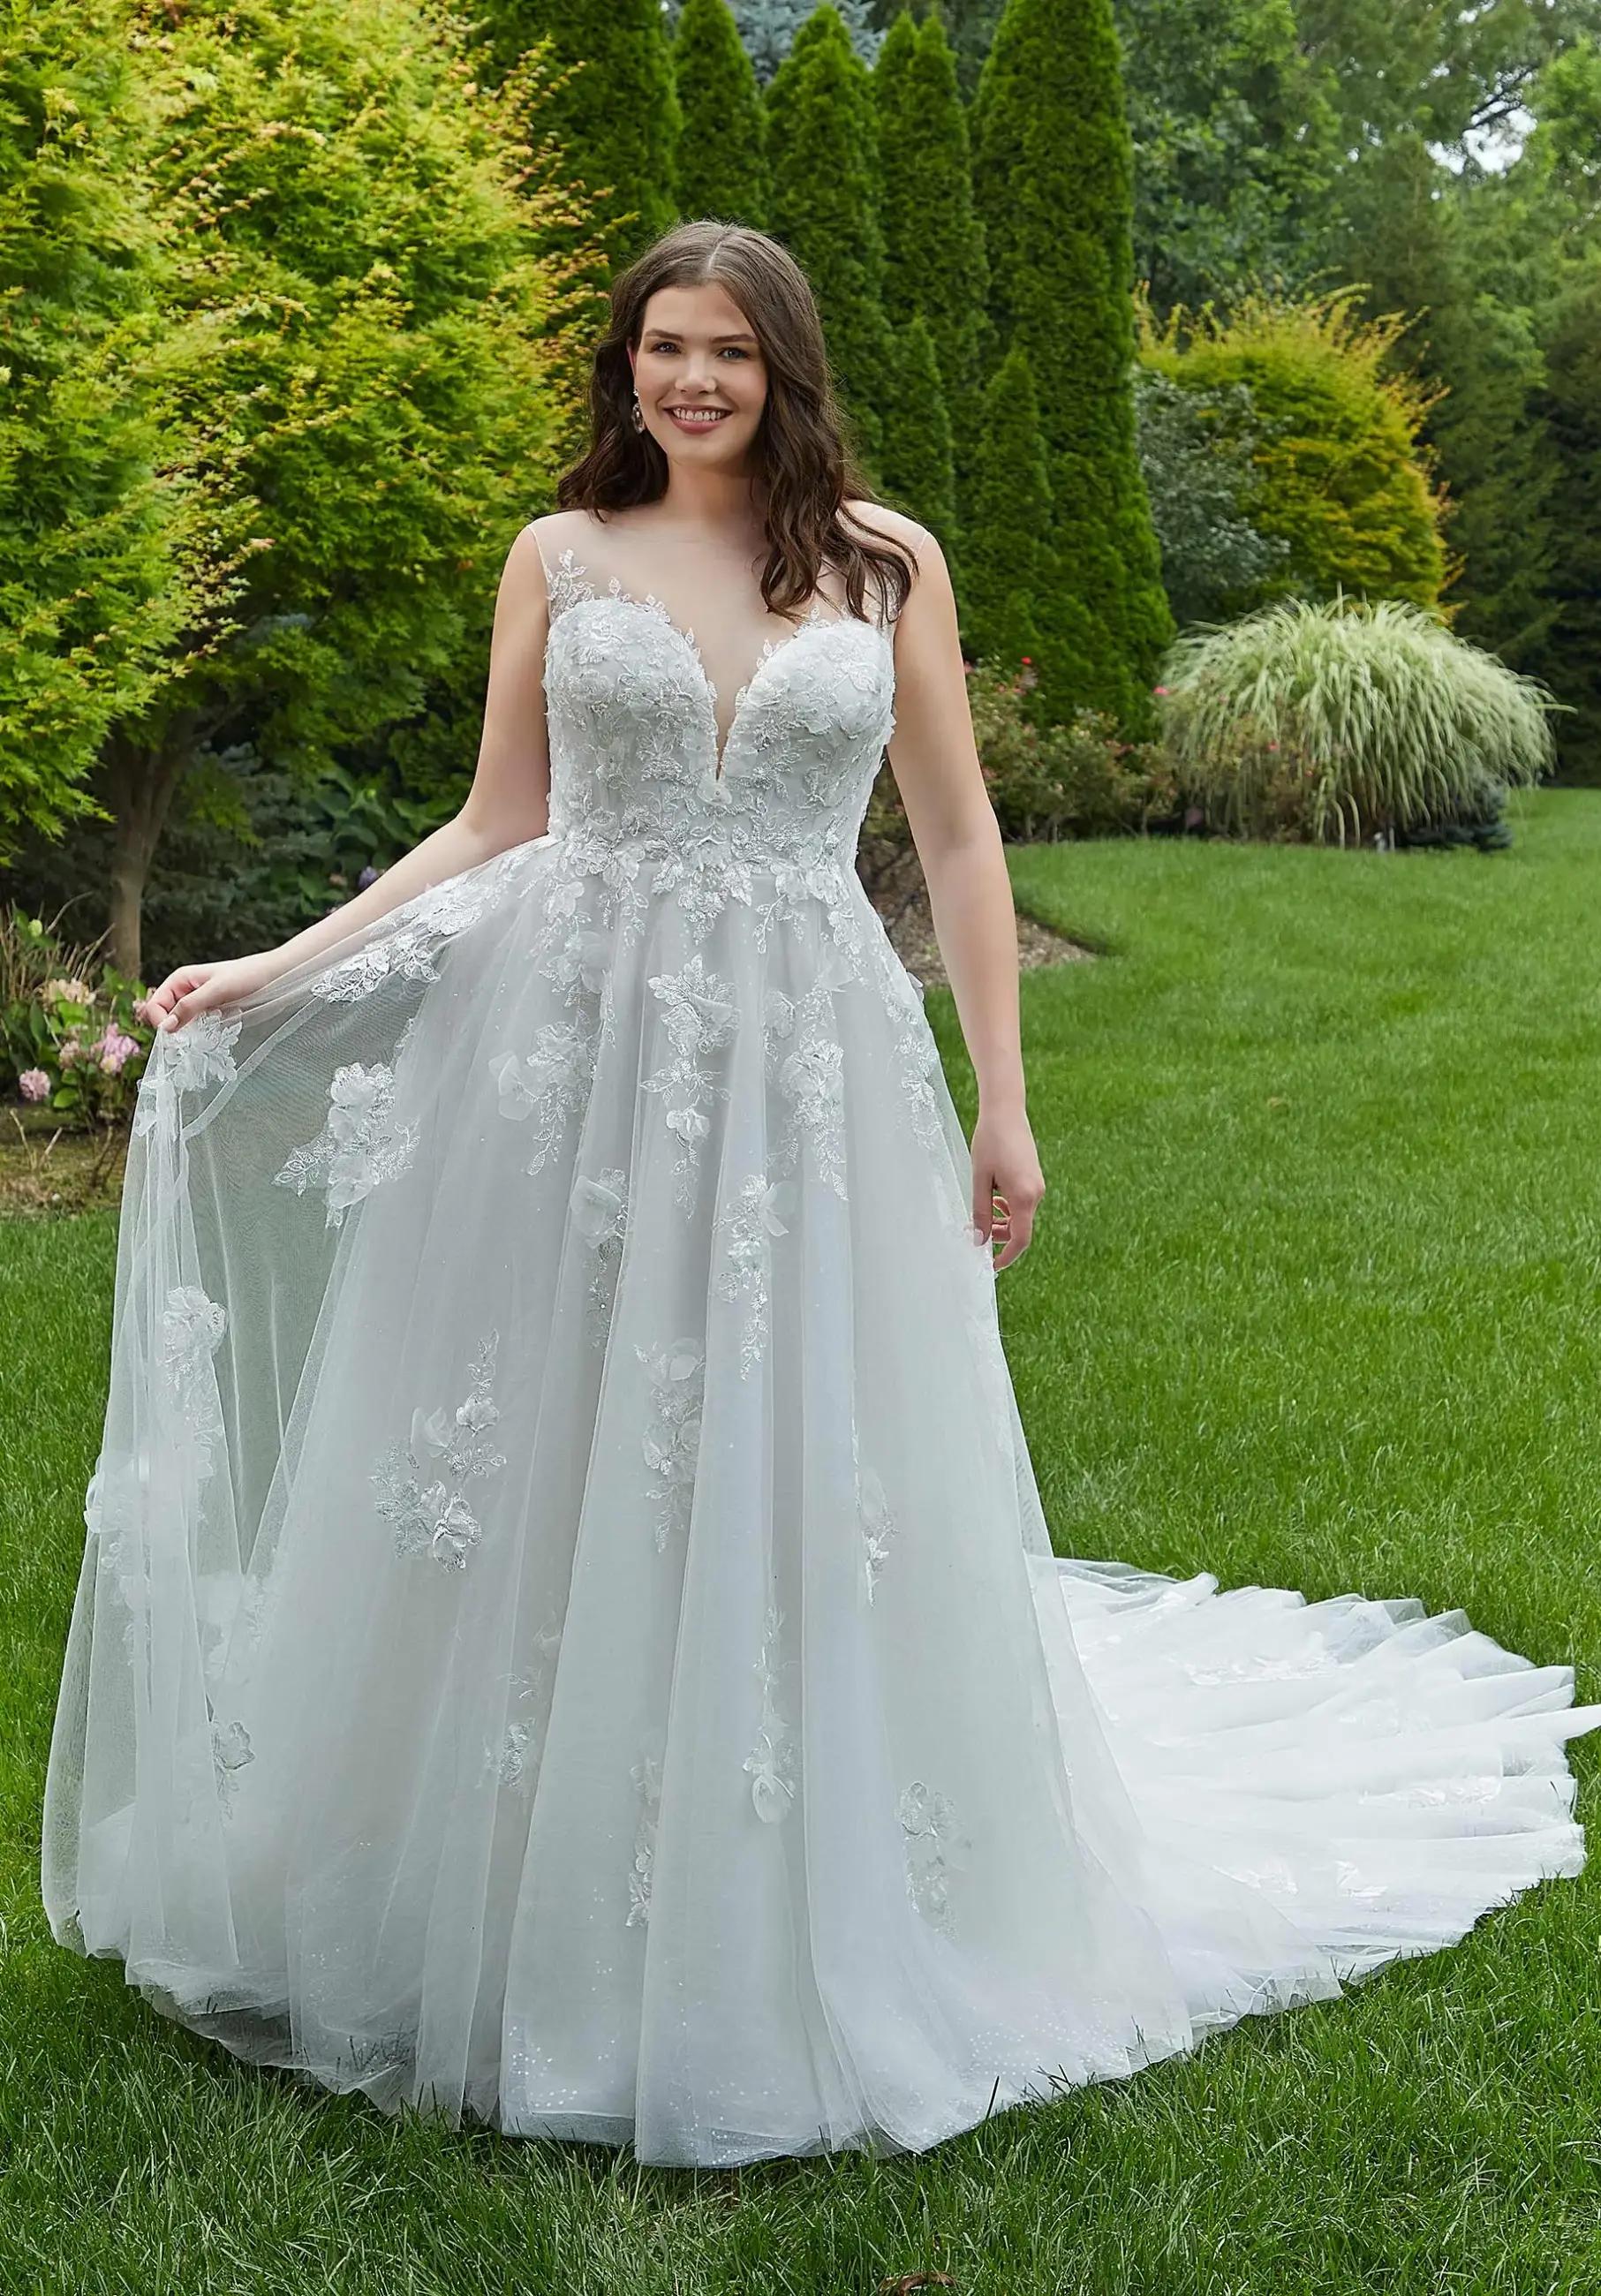 Finding the Ideal Plus-Size Wedding Dress for Every Body Image